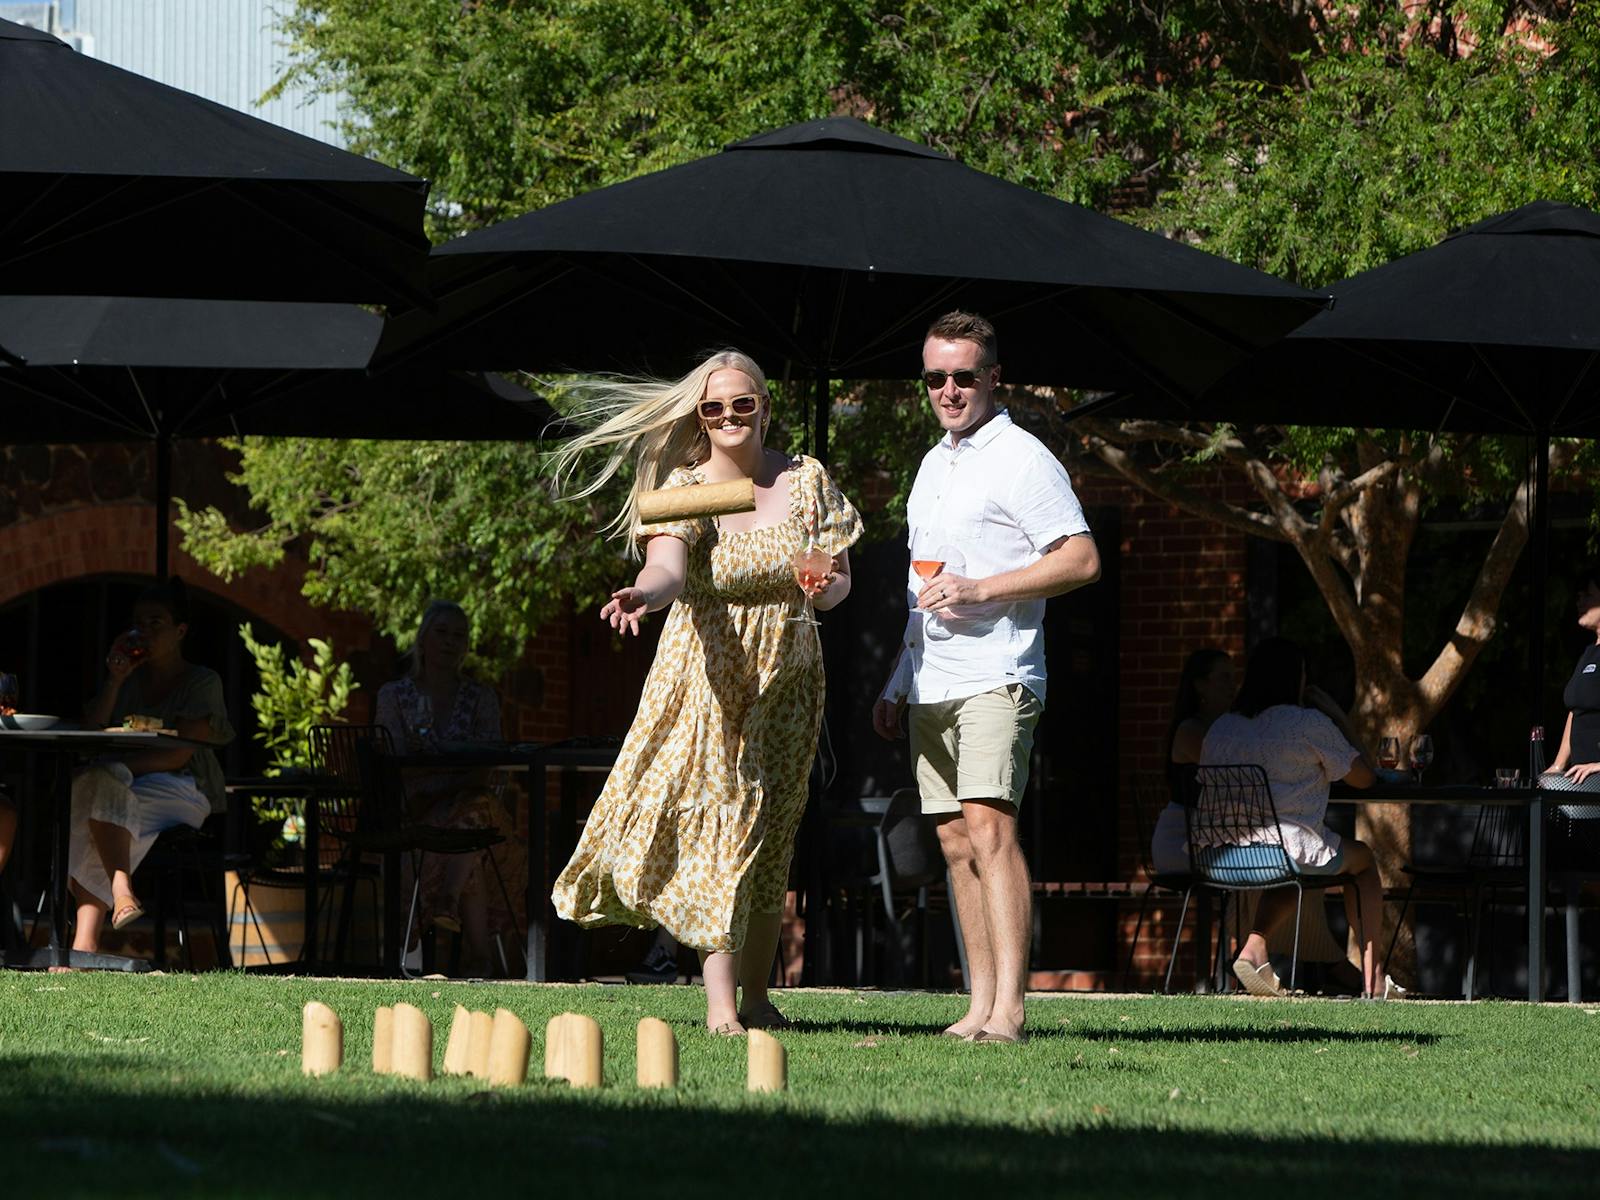 A couple play lawn games in Harry's Garden with a drink in hand